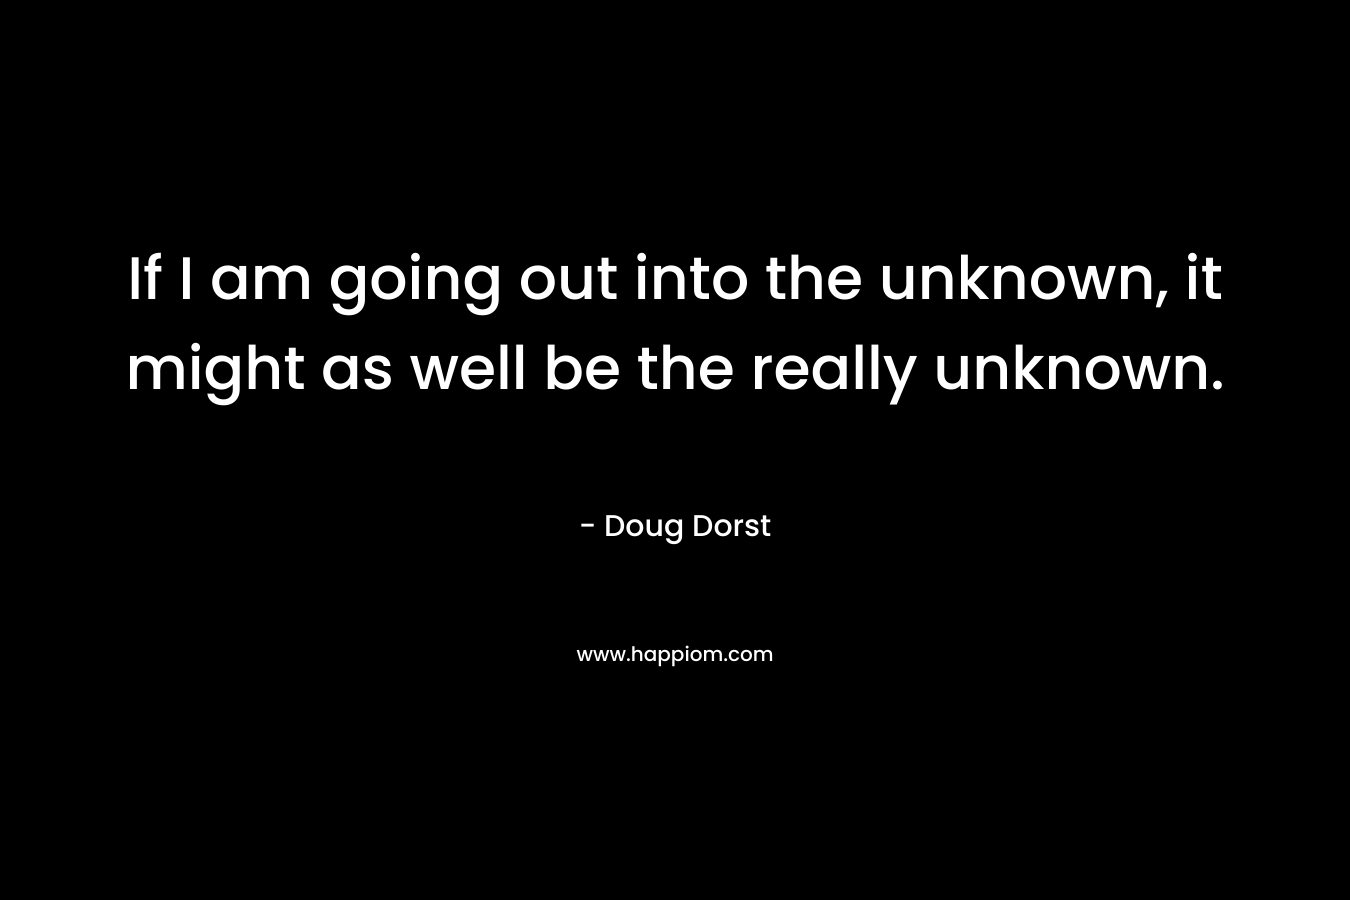 If I am going out into the unknown, it might as well be the really unknown.